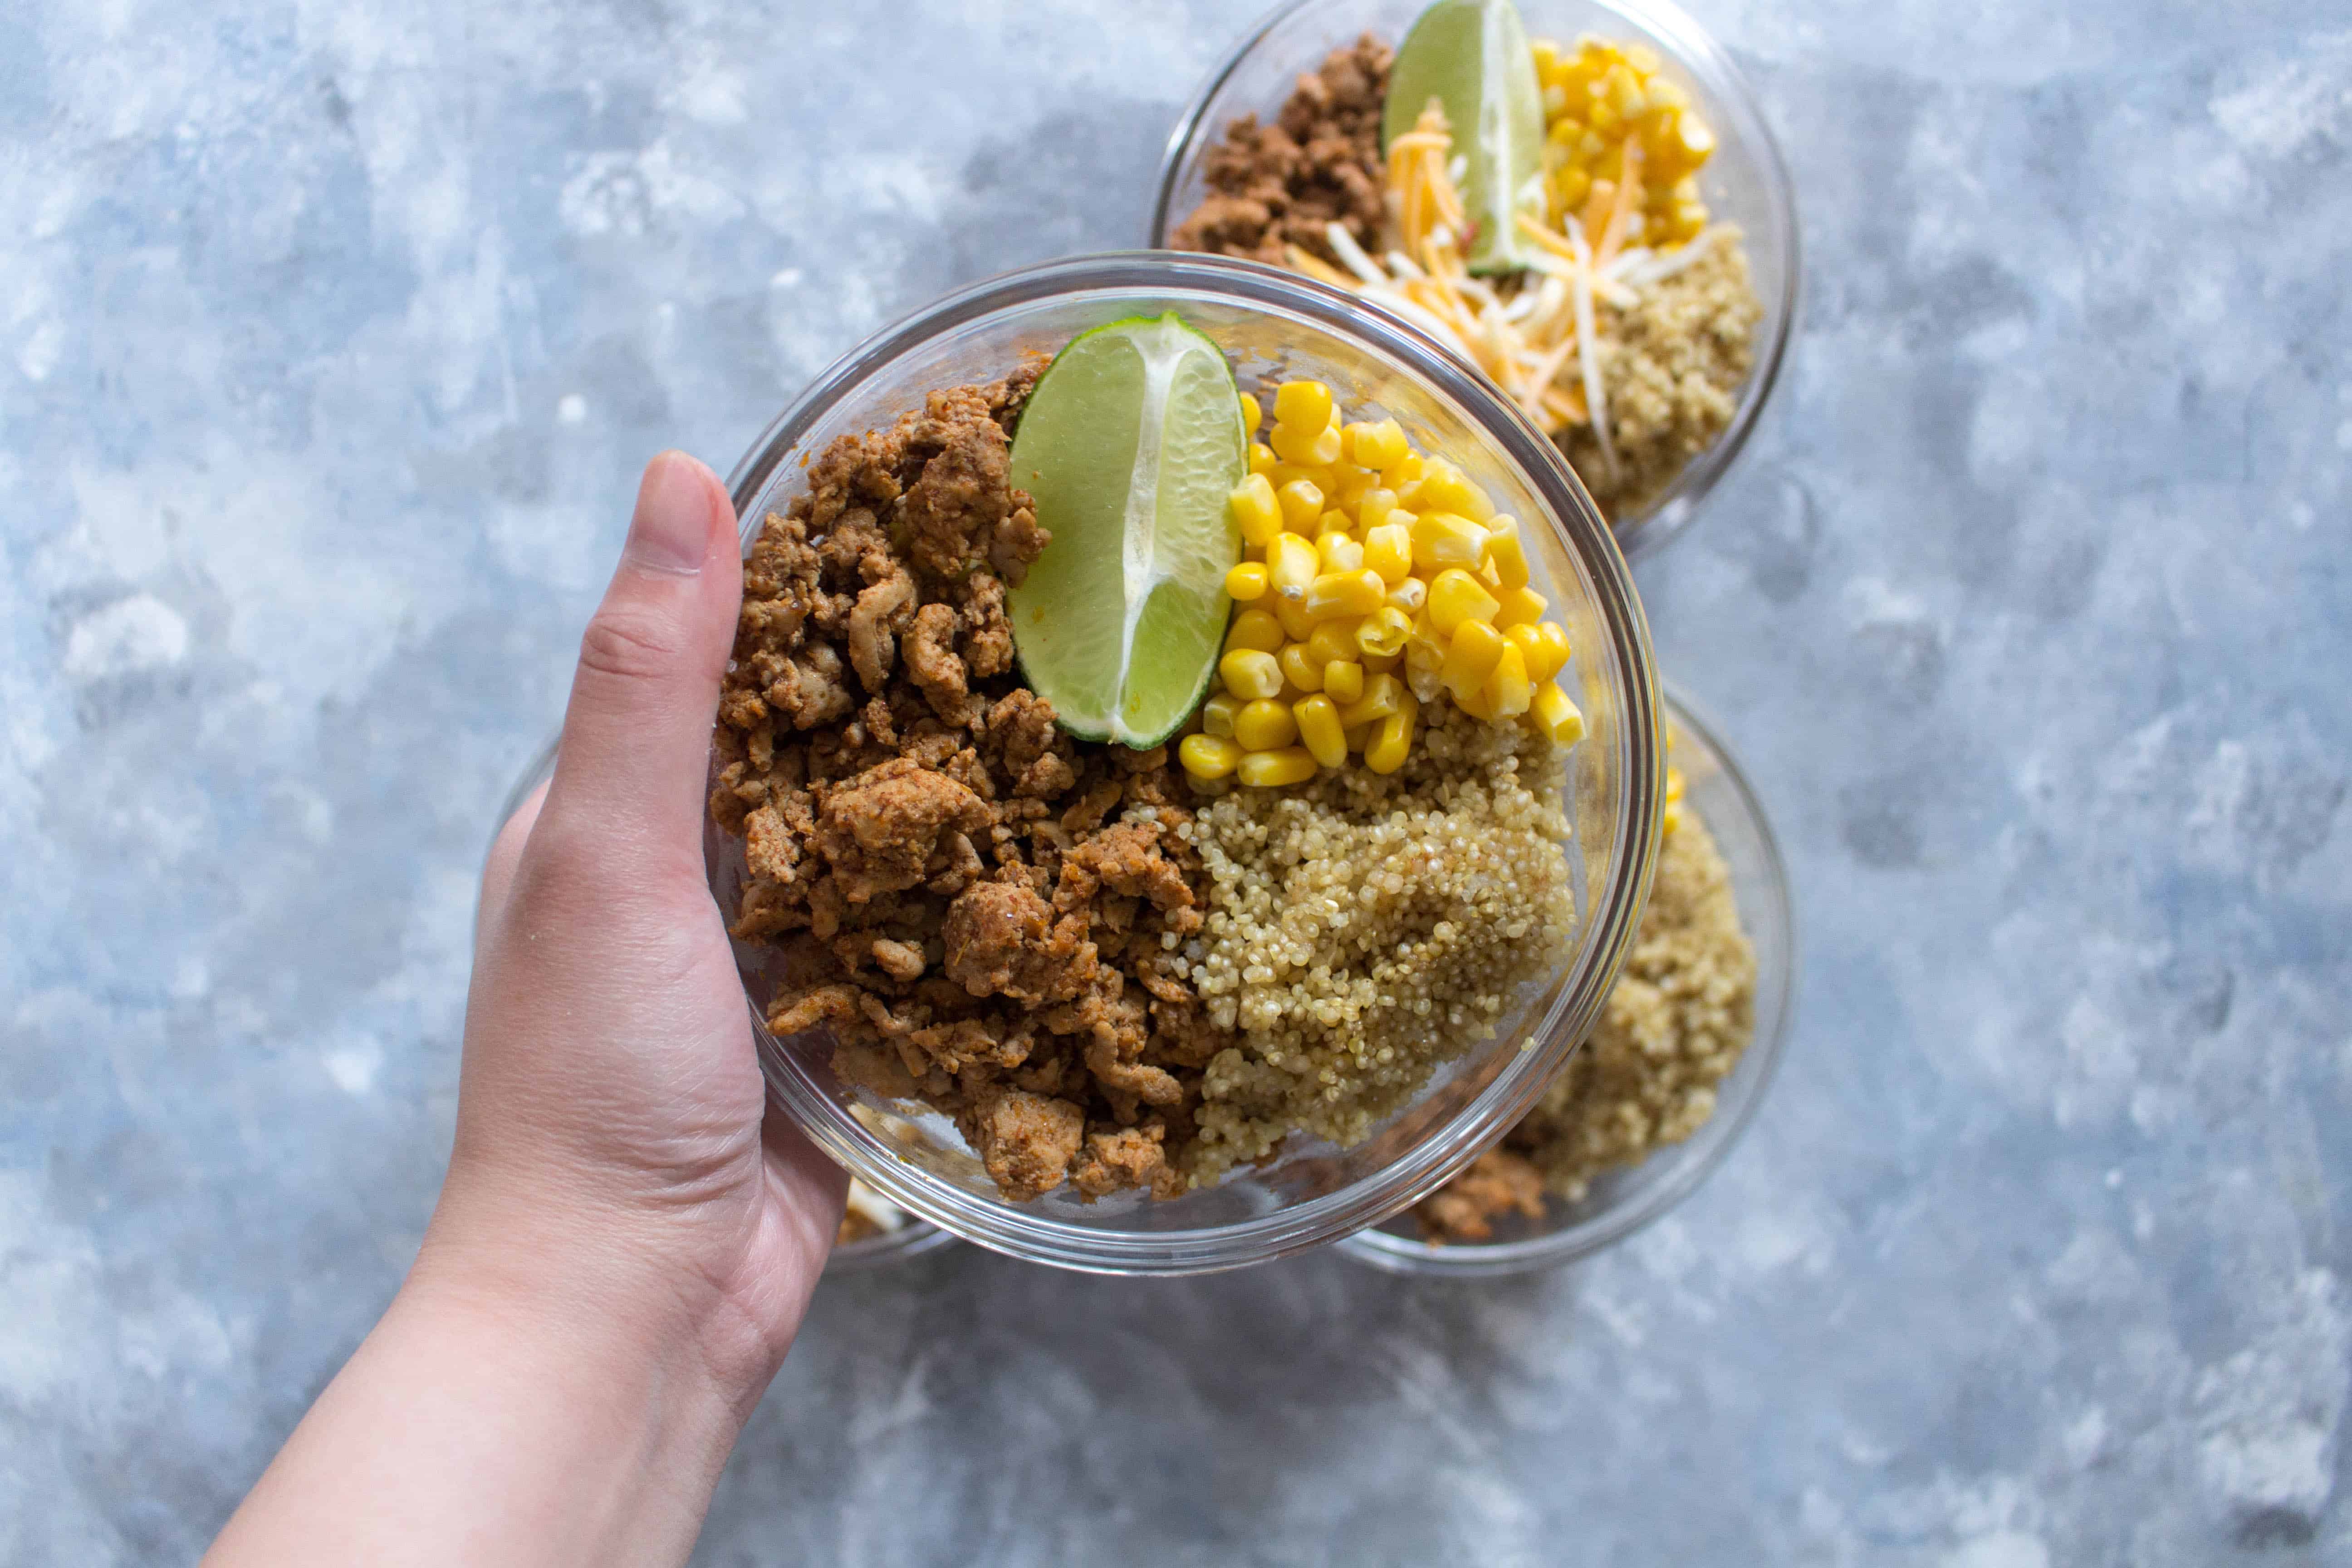 A healthier version of the popular taco bowls for lunch, this healthy turkey taco bowl meal prep will have you reaching for seconds! Made in under 30 minutes, it's simple but delicious!